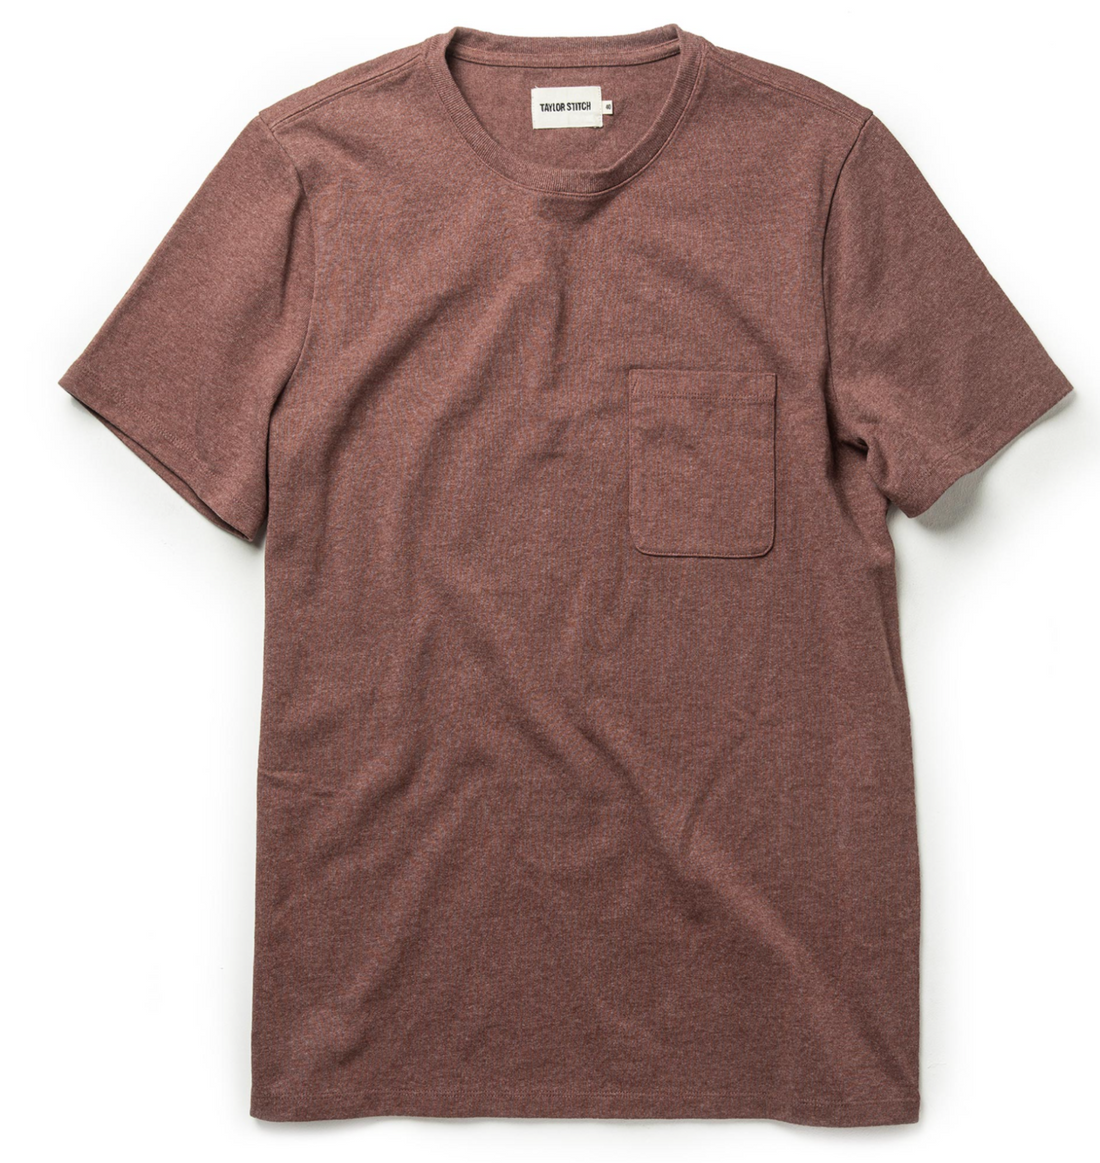 Taylor Stitch - The Heavy Bag Tee in Burgundy